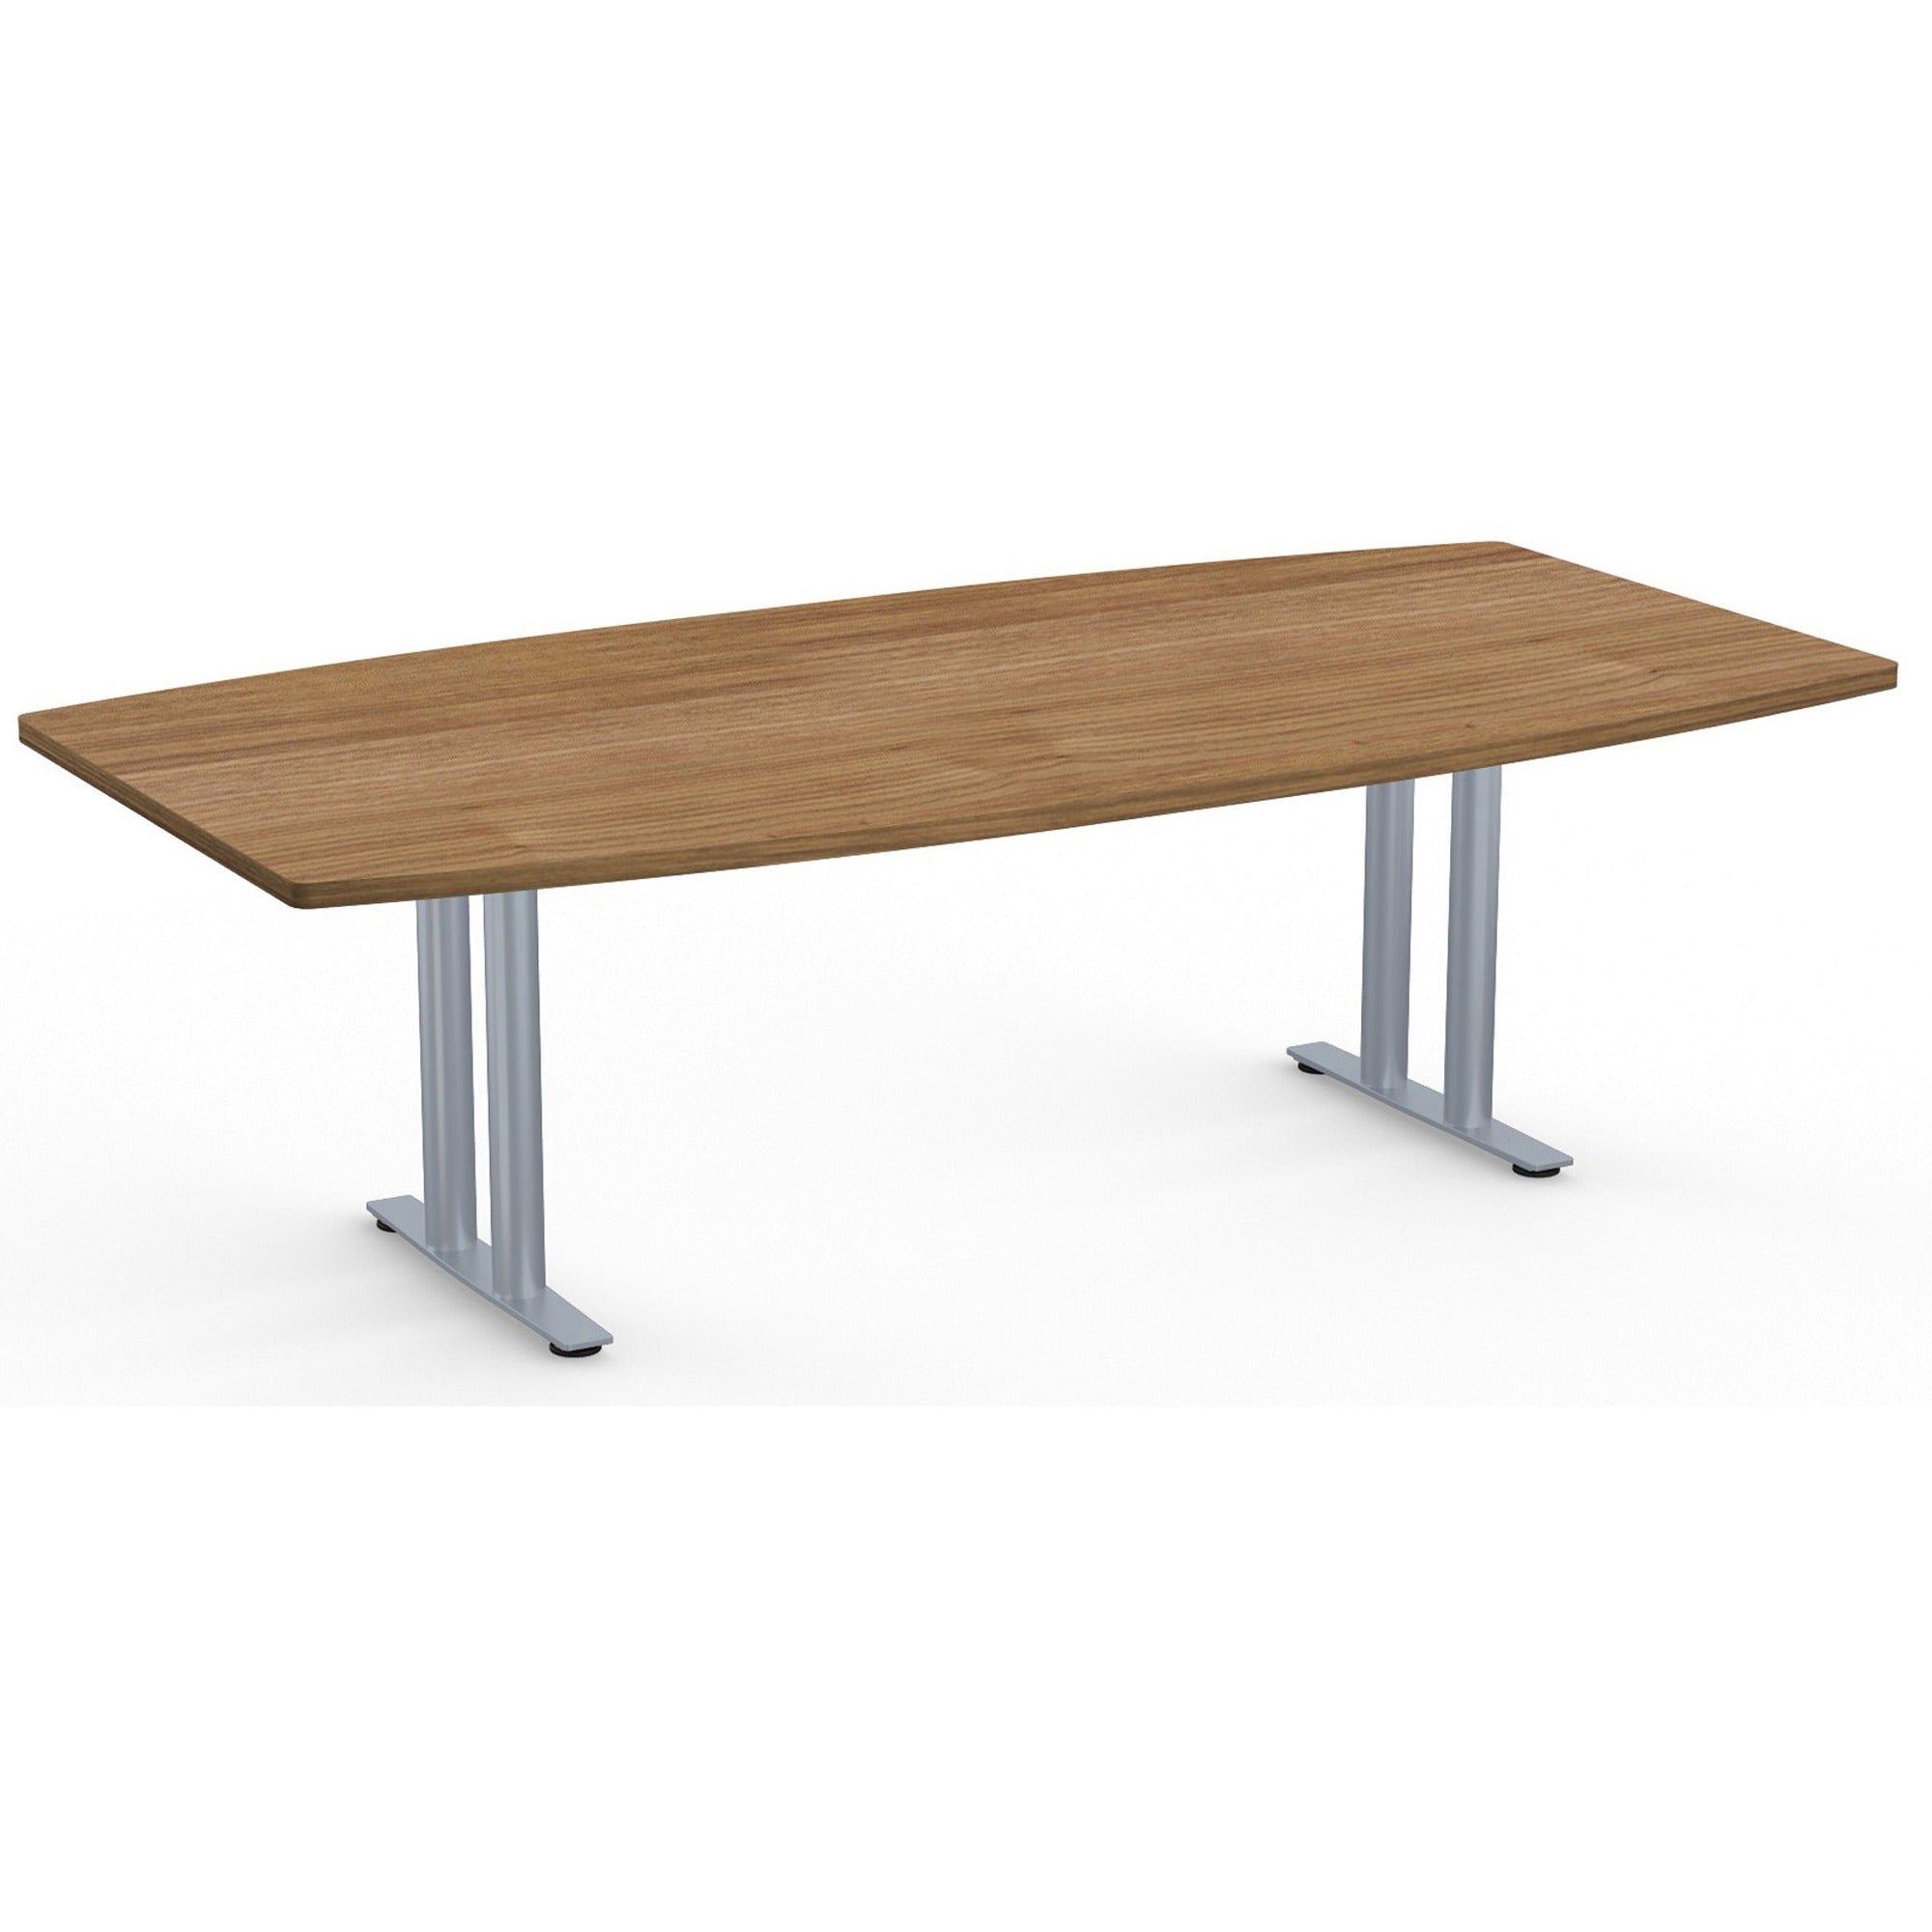 special-t-sienna-conference-table-component-for-table-topriver-cherry-boat-top-t-shaped-base-96-table-top-length-x-48-table-top-width-29-height-assembly-required-high-pressure-laminate-hpl-1-each_sctsientl4896rc - 1